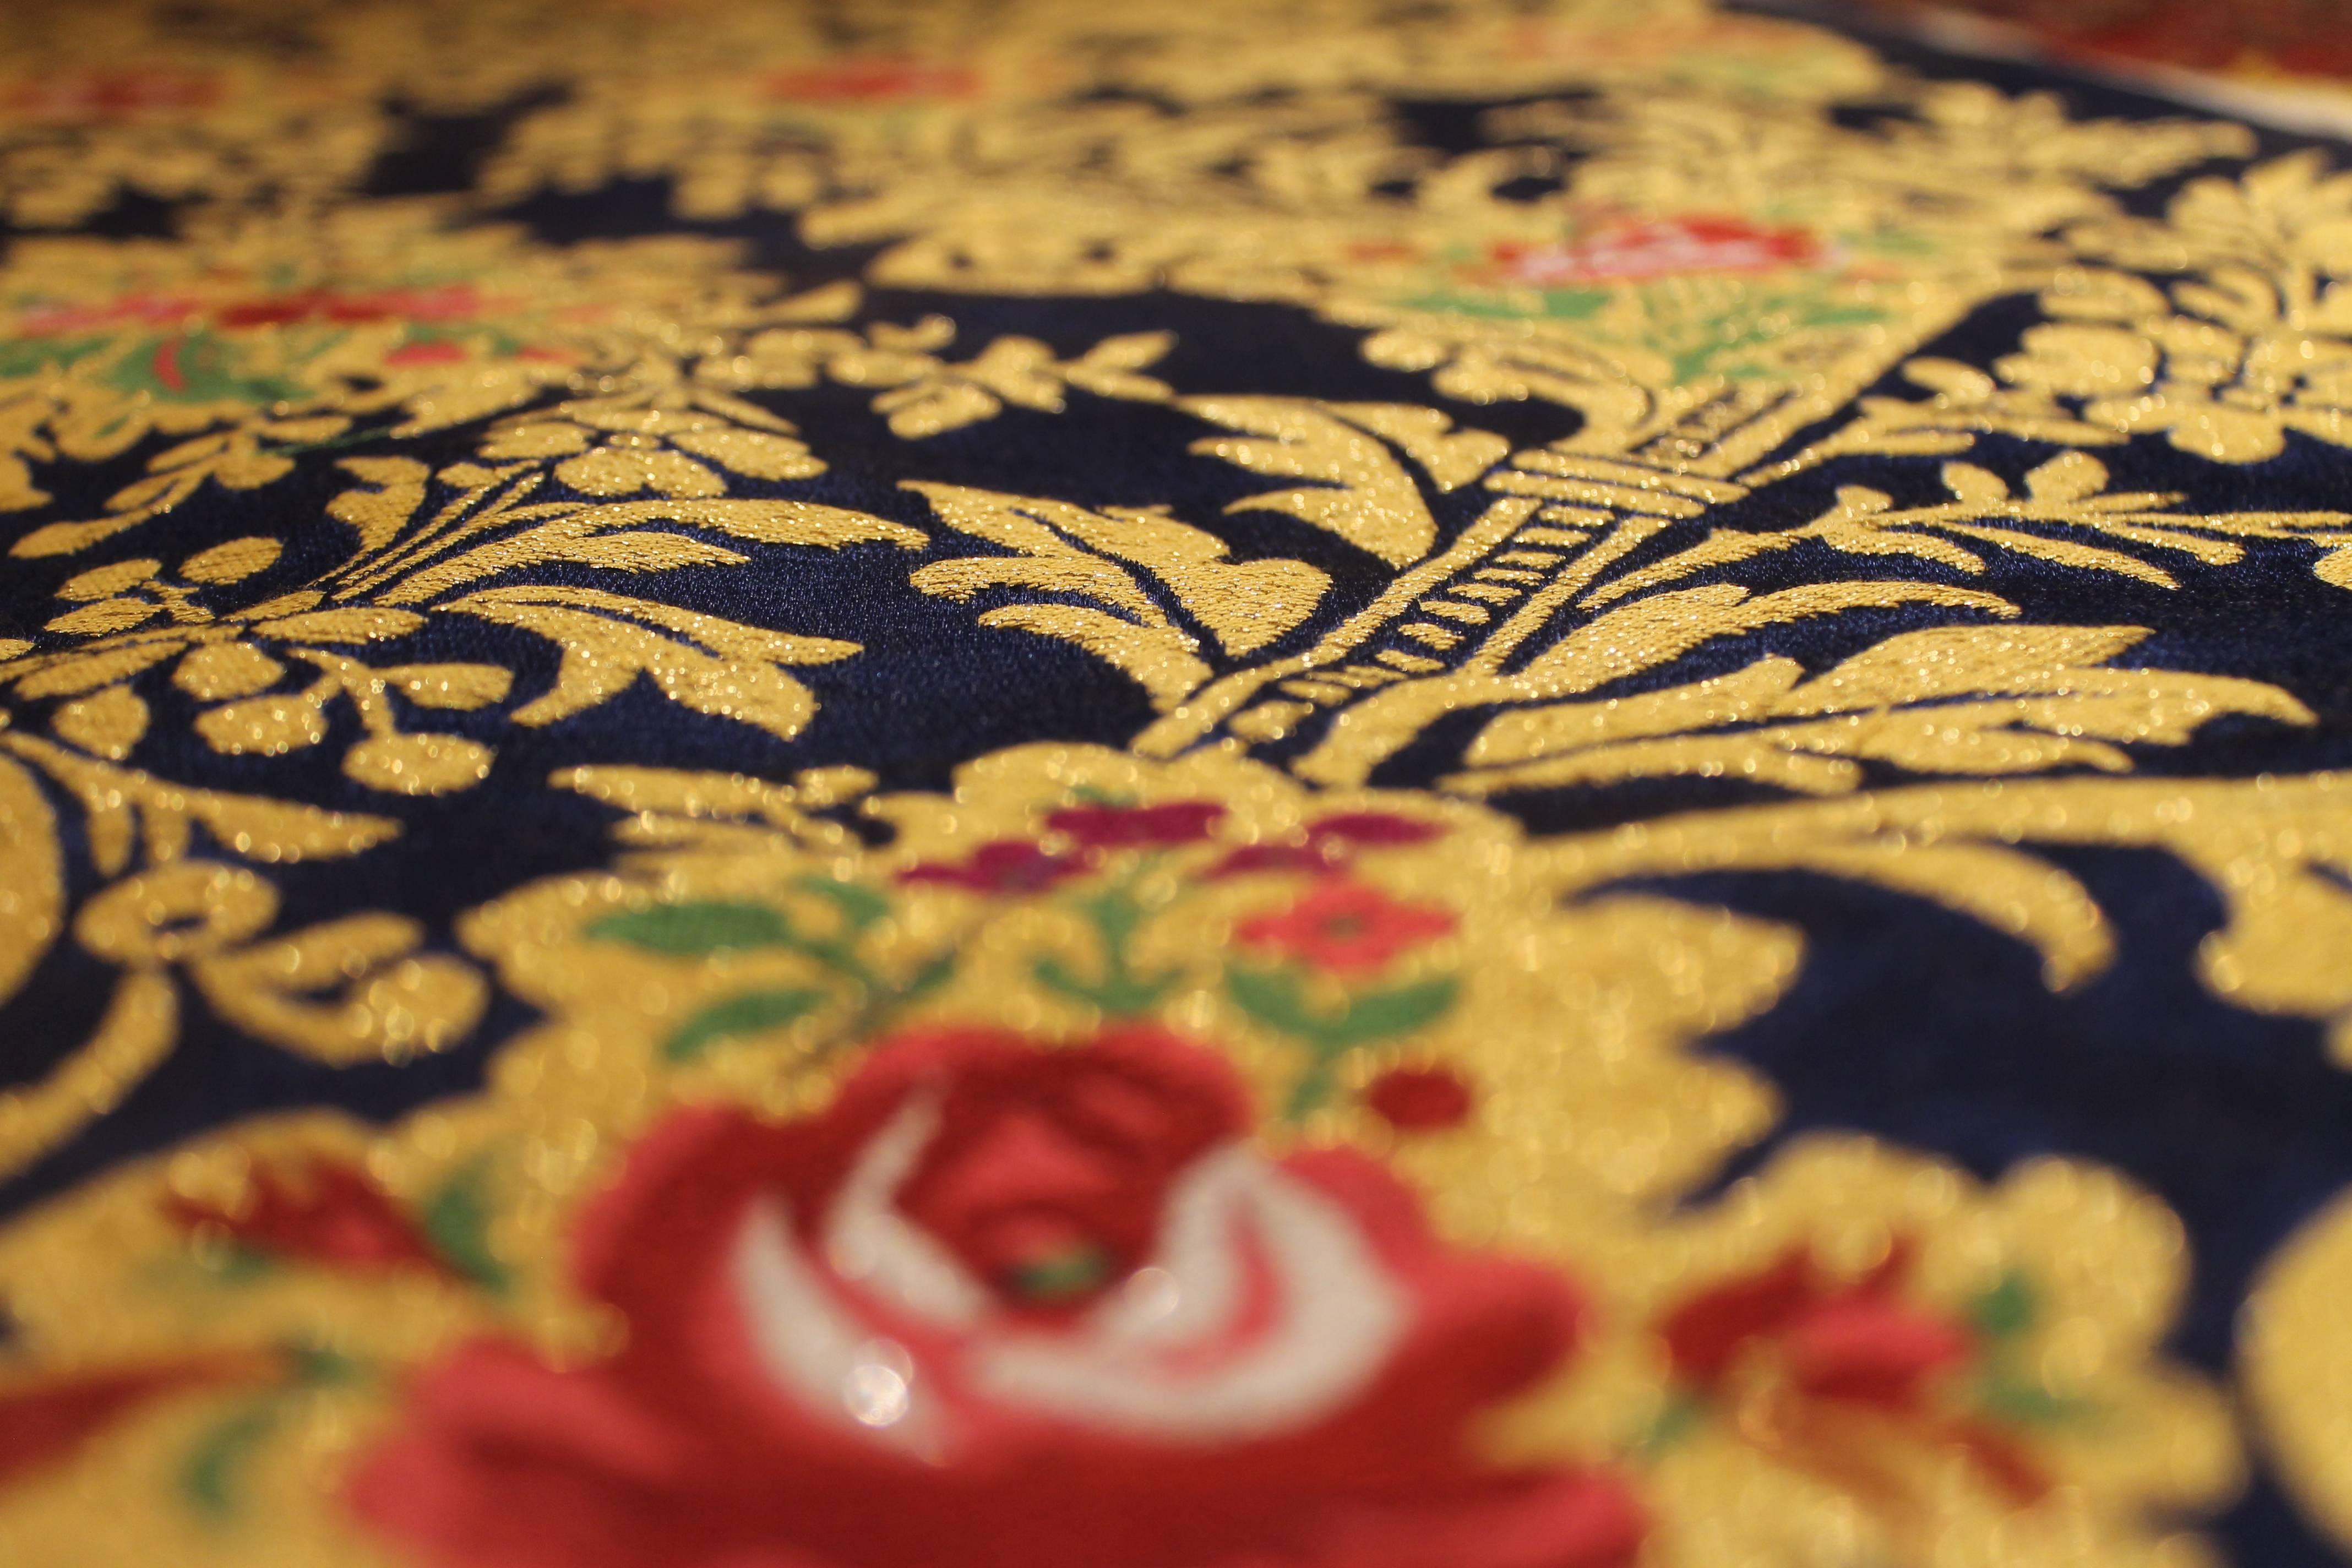 Italian Green Silk Blend Brocade Fabric with Red Roses and Gold Floral Patterns For Sale 3